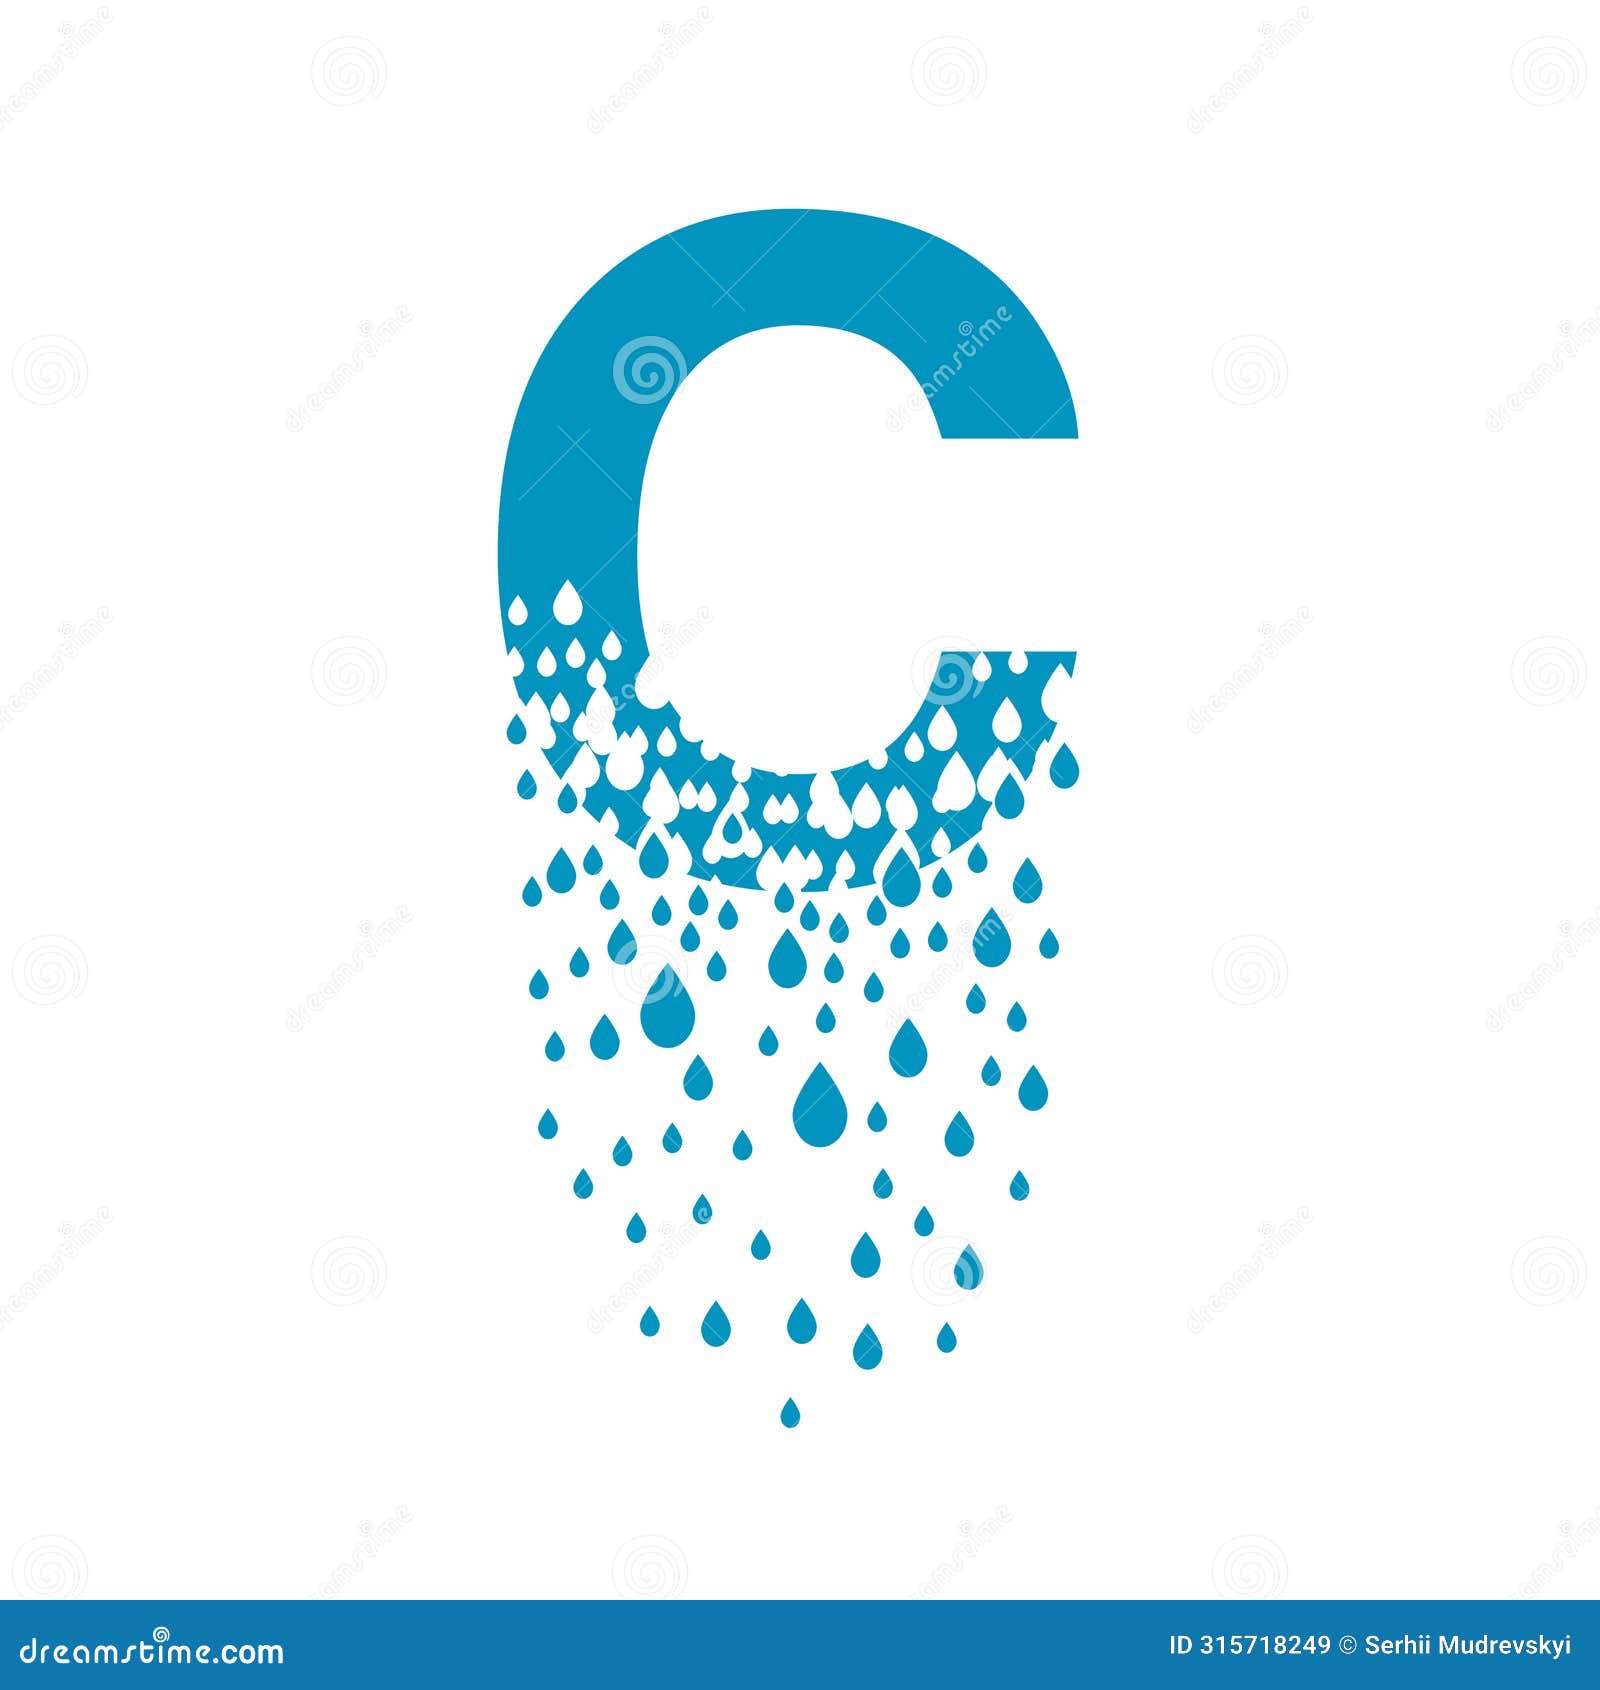 the letter c dissolves into droplets. drops of liquid fall out as precipitation. destruction effect. dispersion